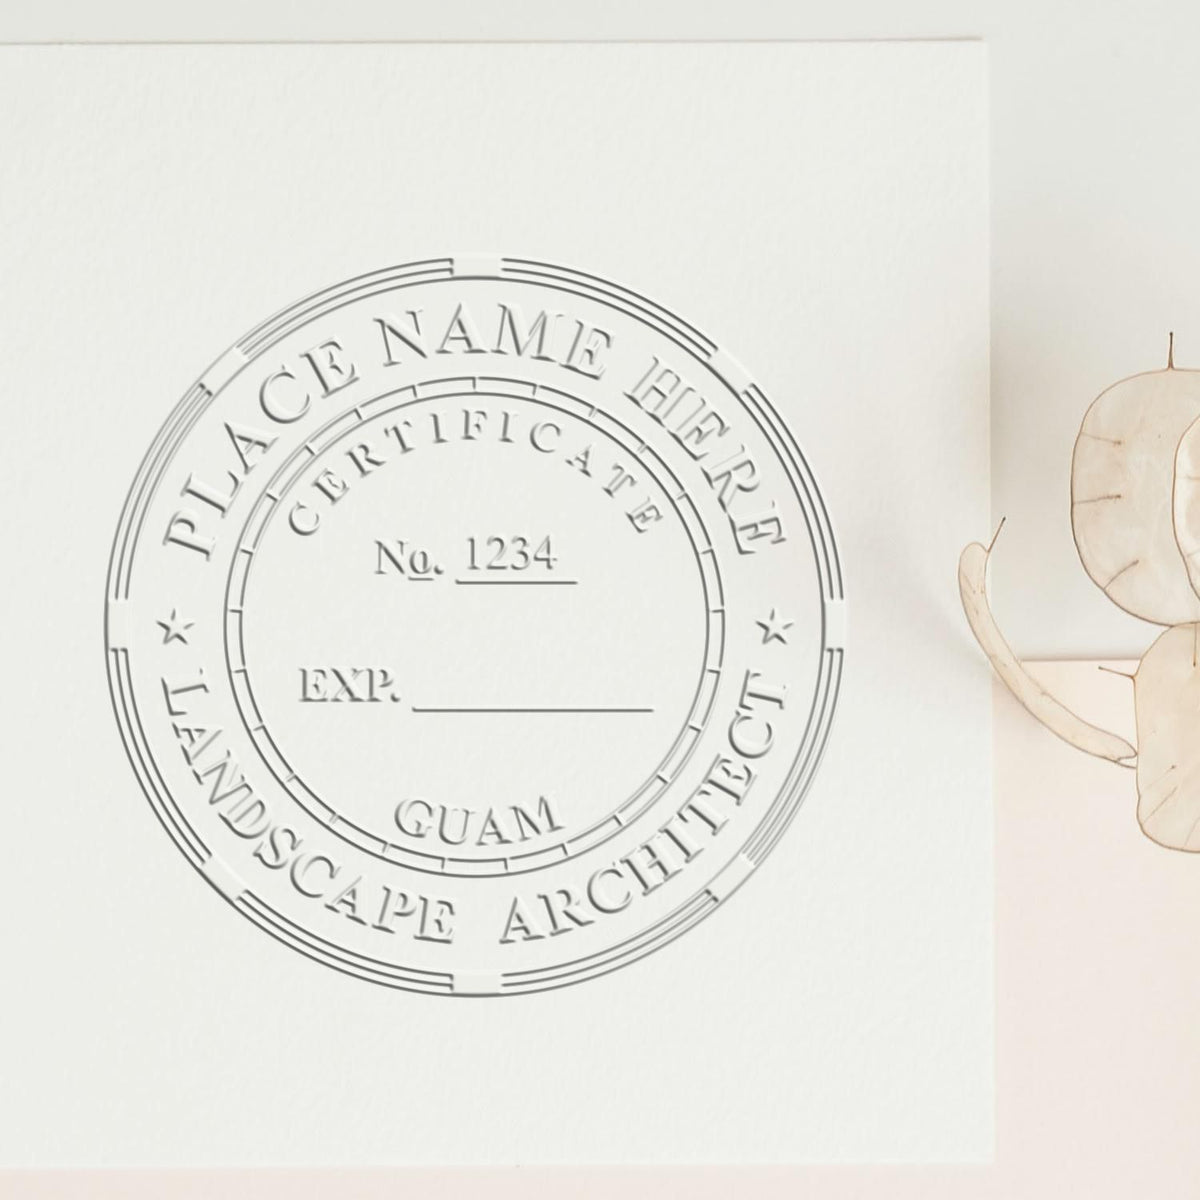 A stamped imprint of the Gift Guam Landscape Architect Seal in this stylish lifestyle photo, setting the tone for a unique and personalized product.